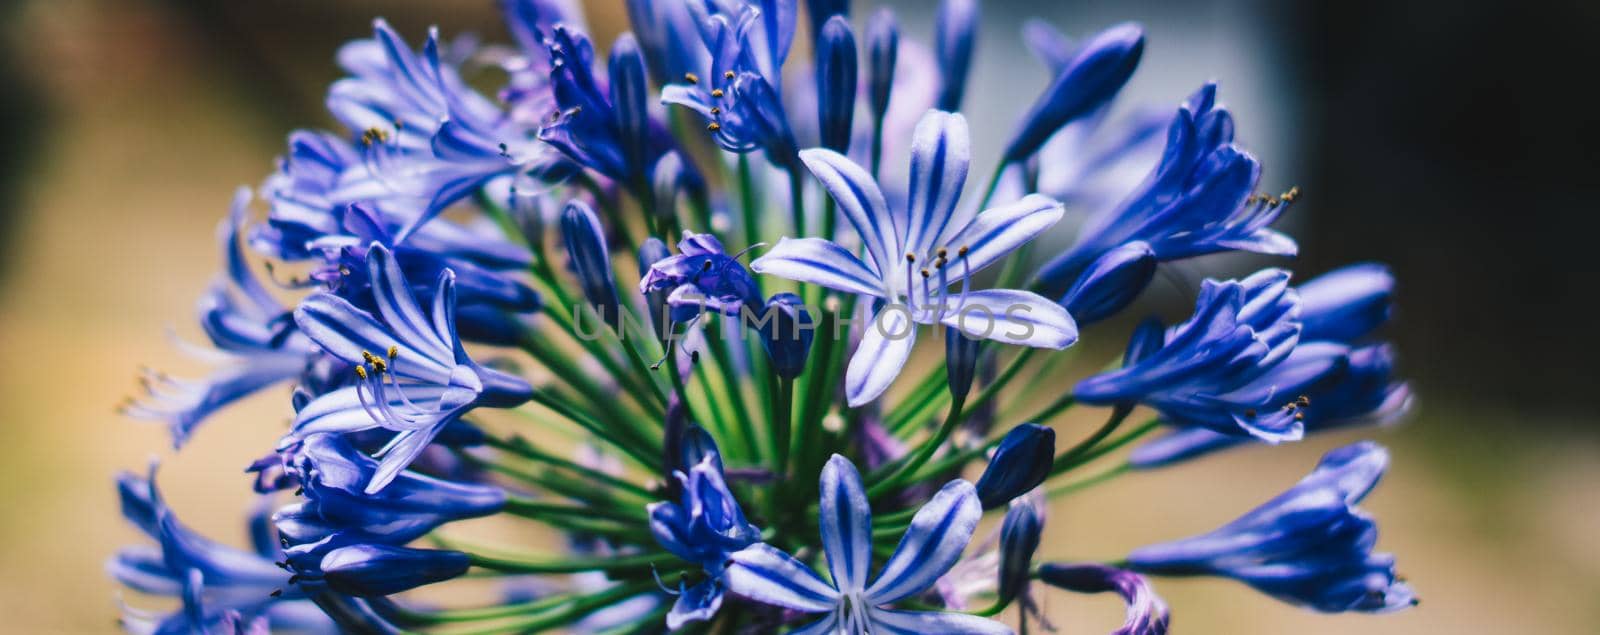 BANNER Real beauty nature photo background. Macro close up Agapanthus purple lilac inflorescence petal blue herb flower bloom blossom garden plant Study Botanic summer spring floral symbol tenderness